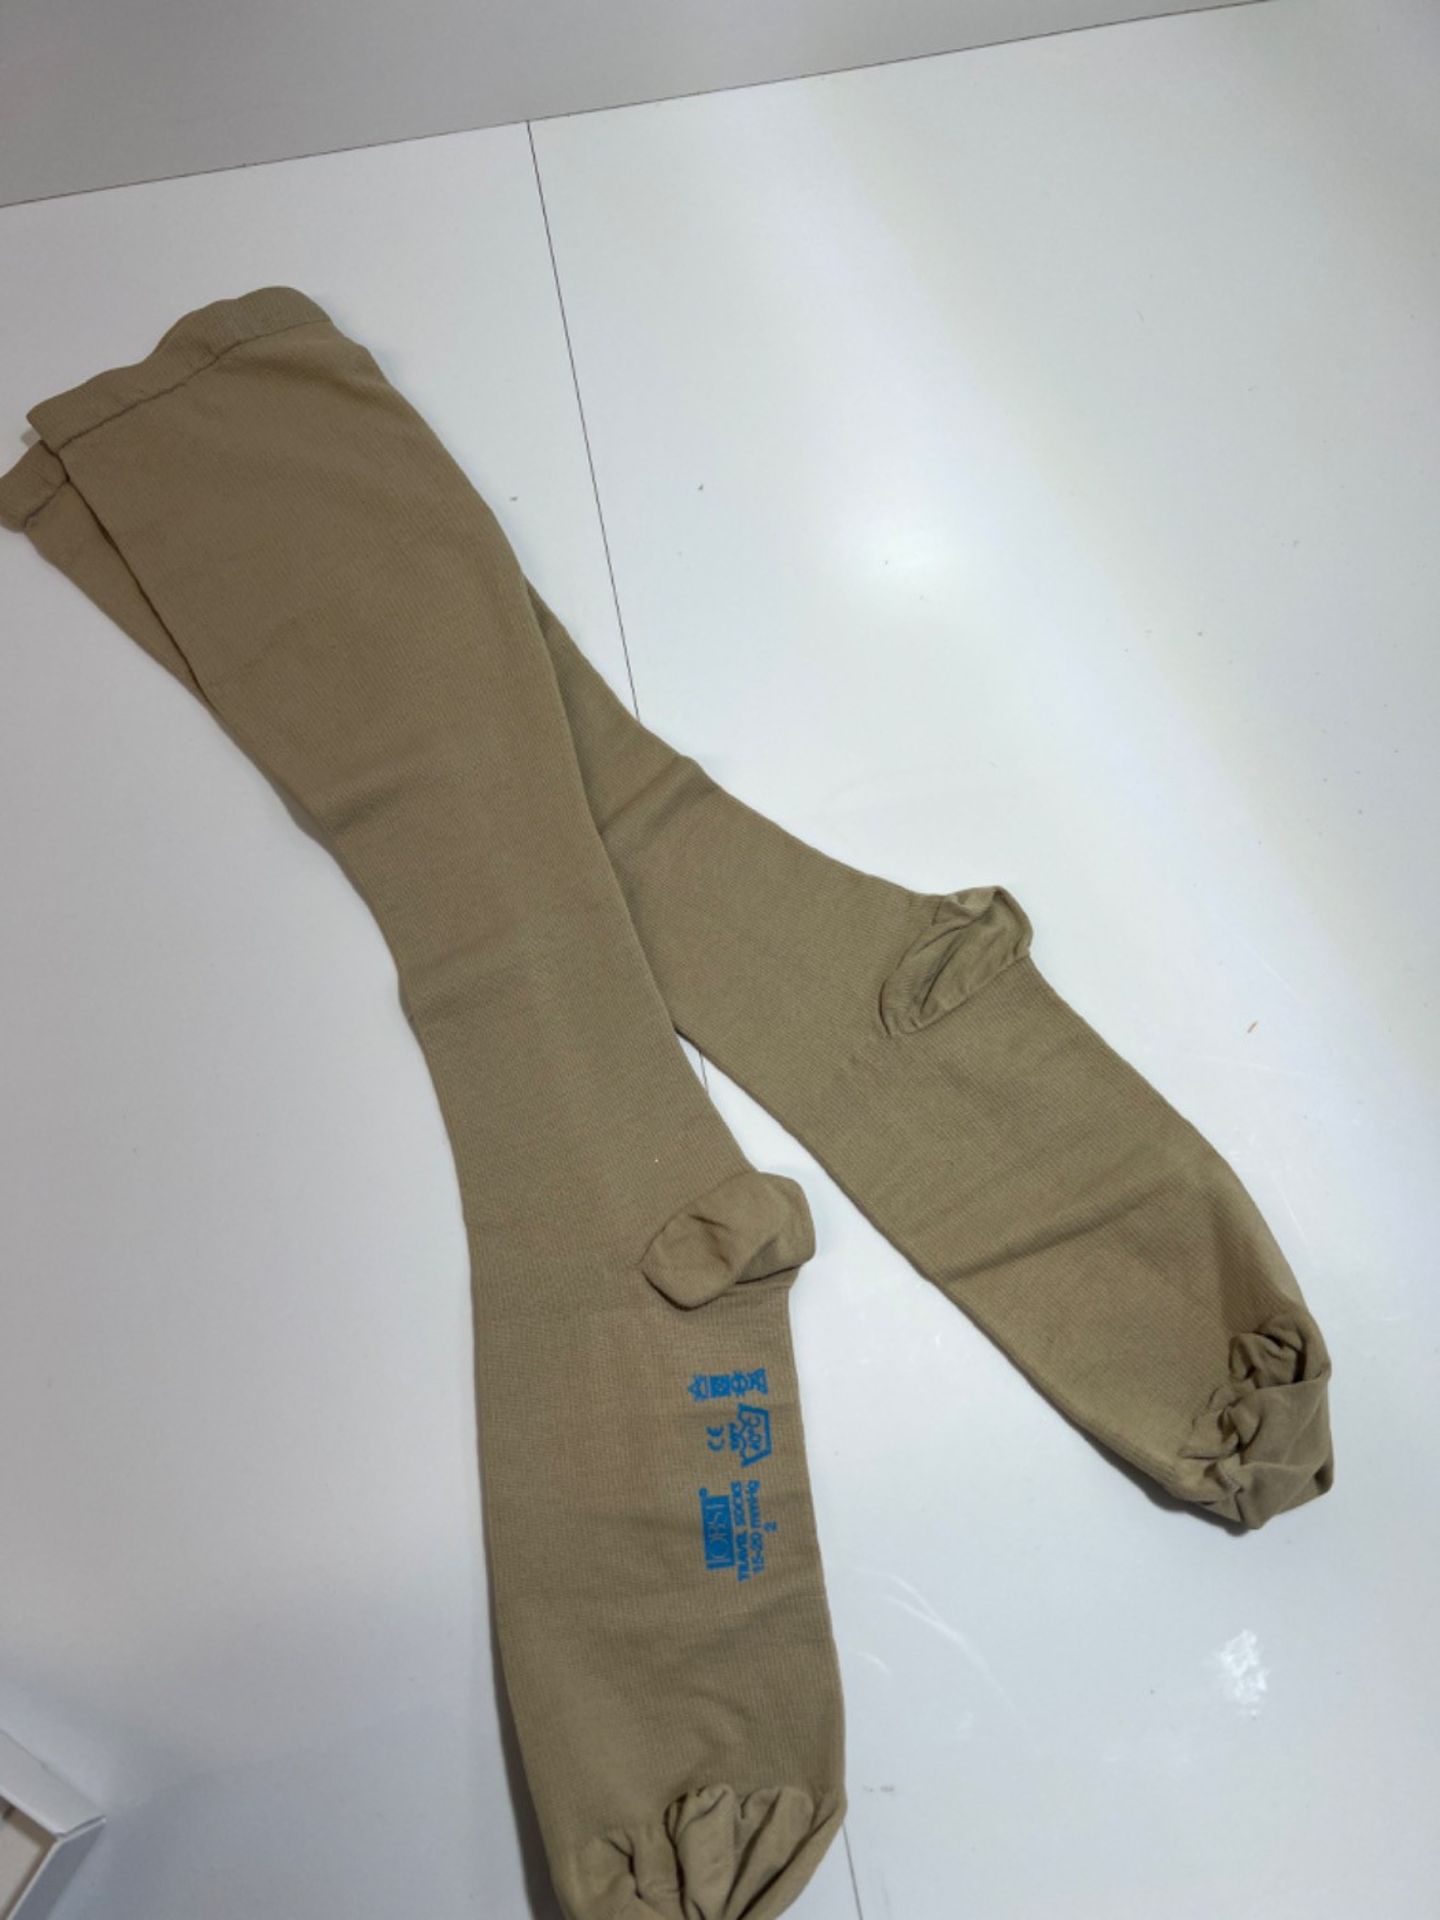 Jobst Travel Knee High Compression Socks - Helps To Prevent Deep Vein Thrombosis During Travel -... - Image 3 of 3